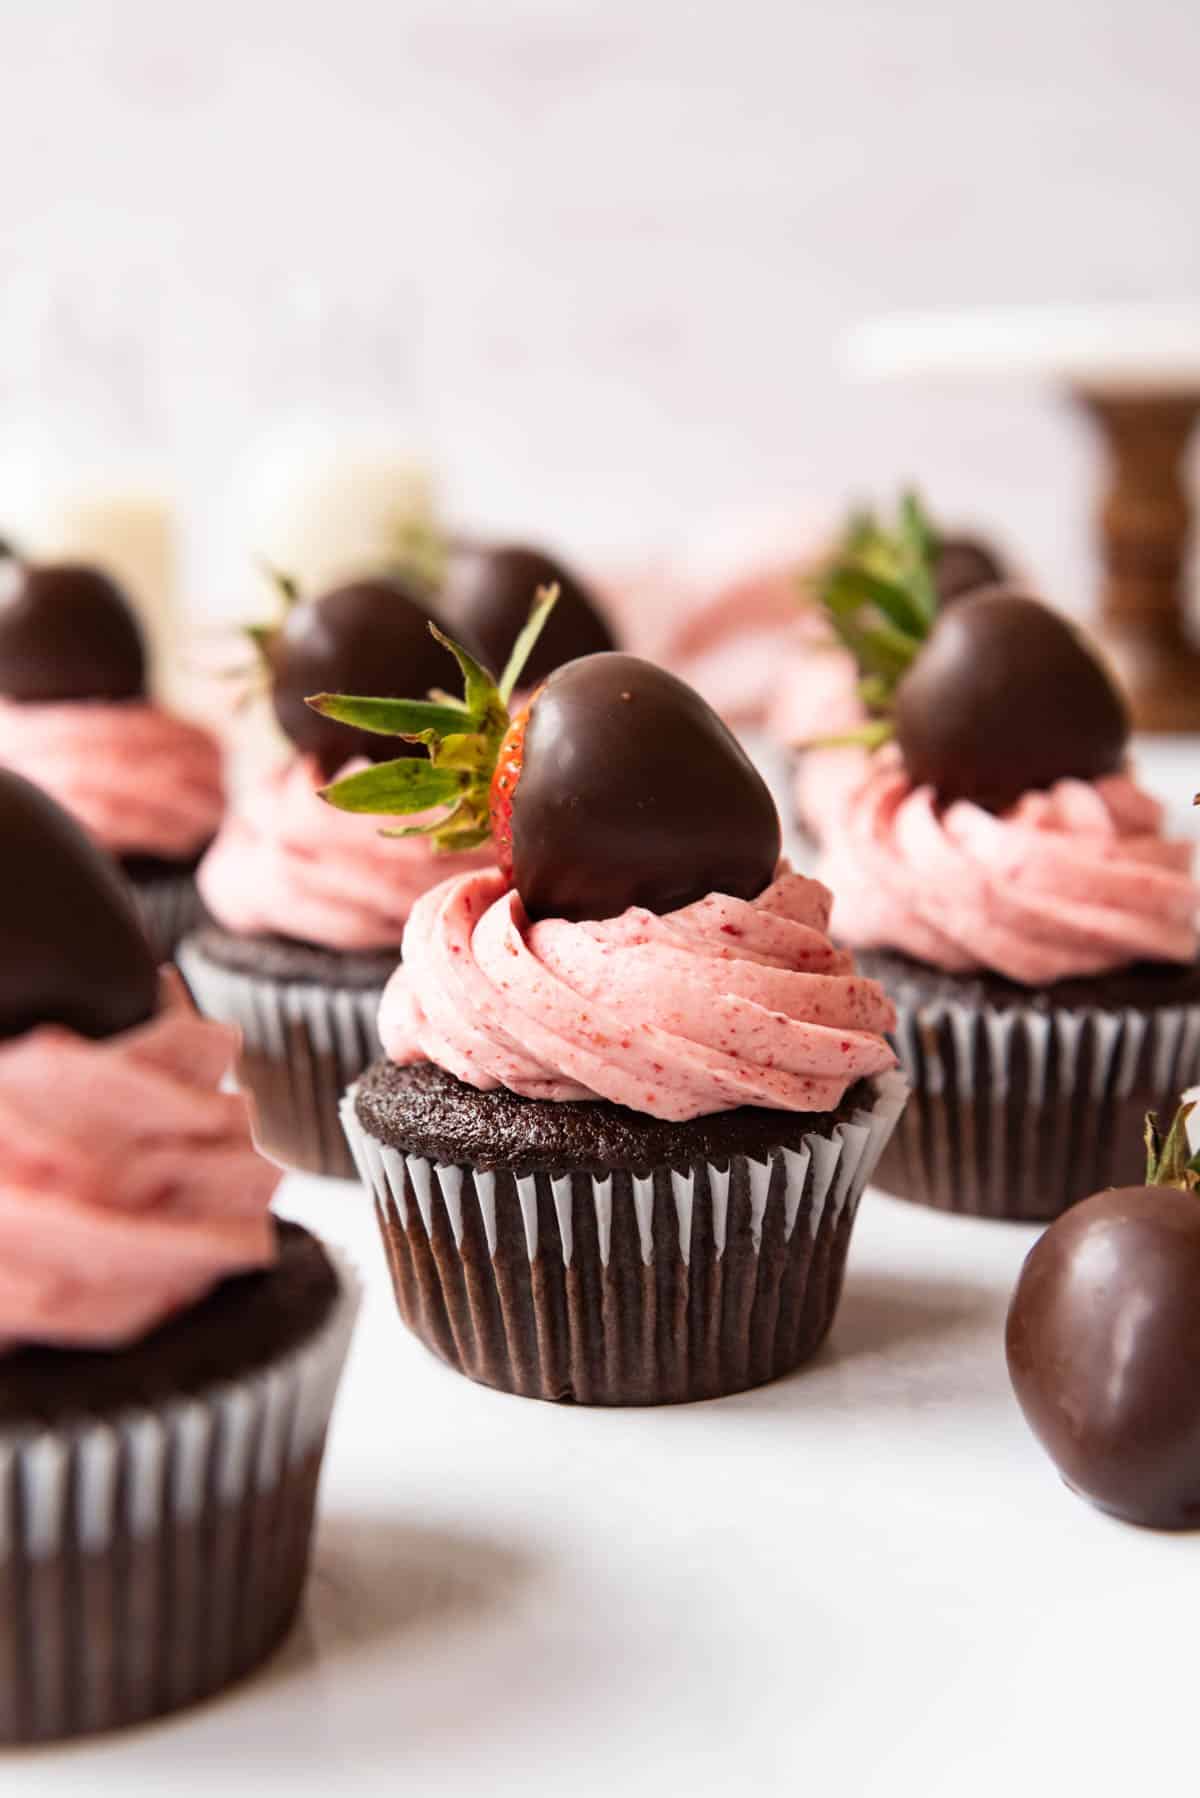 Chocolate cupcakes decorated with tall swirls of piped strawberry frosting and chocolate covered strawberries.